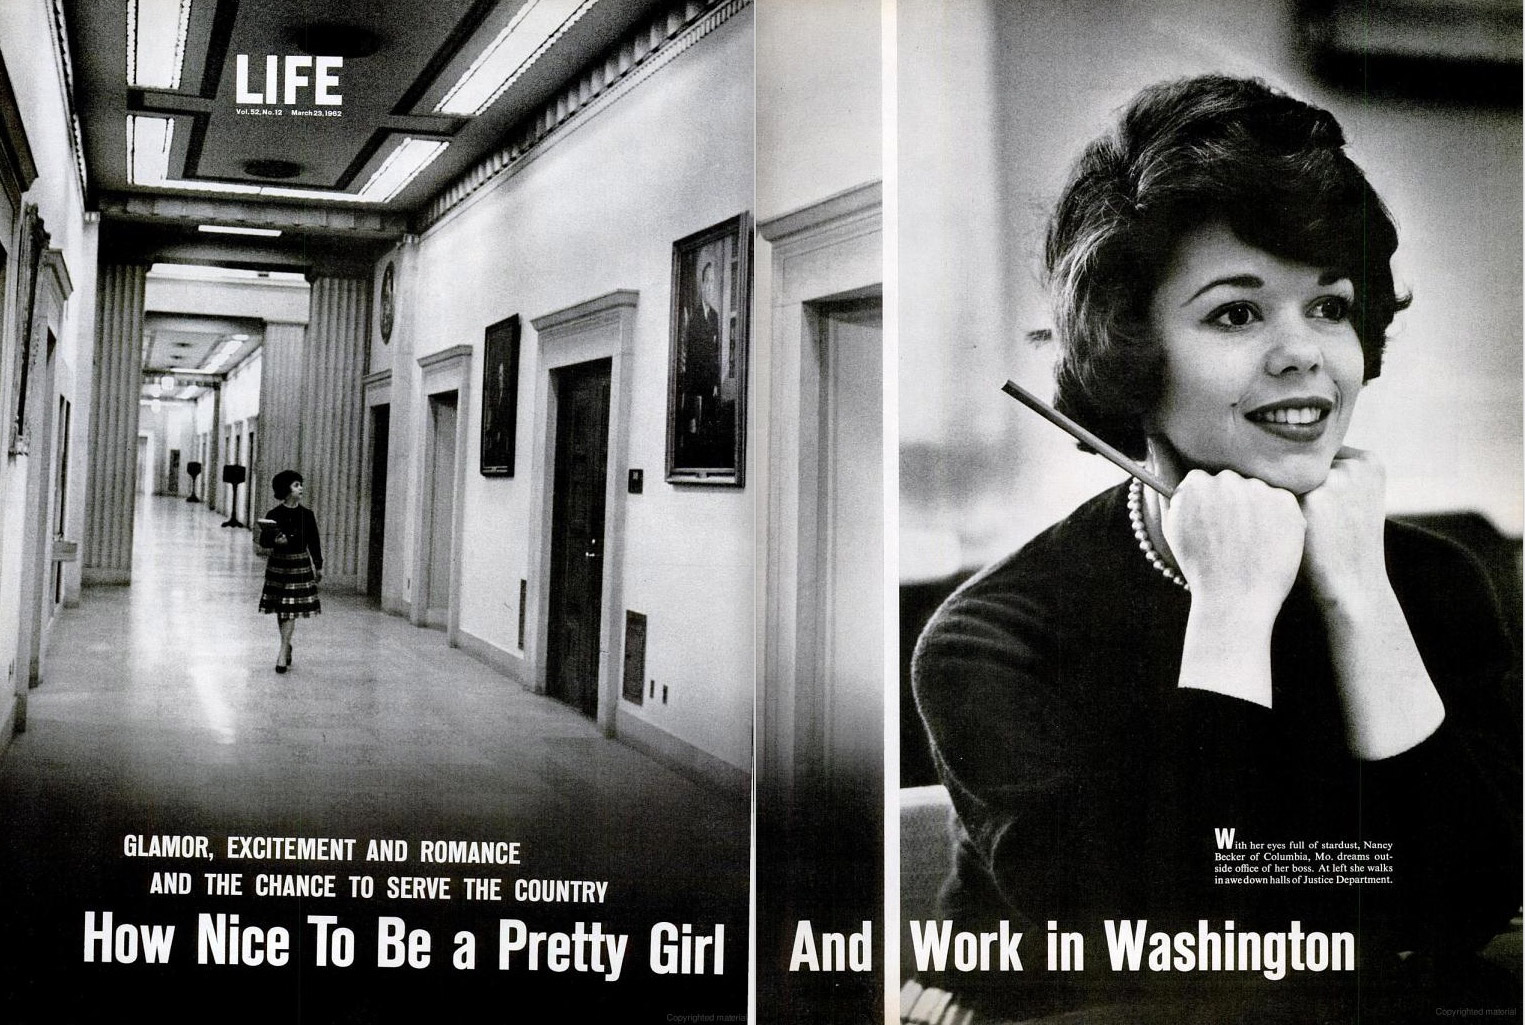 From the March 23, 1962 issue of LIFE Magazine.